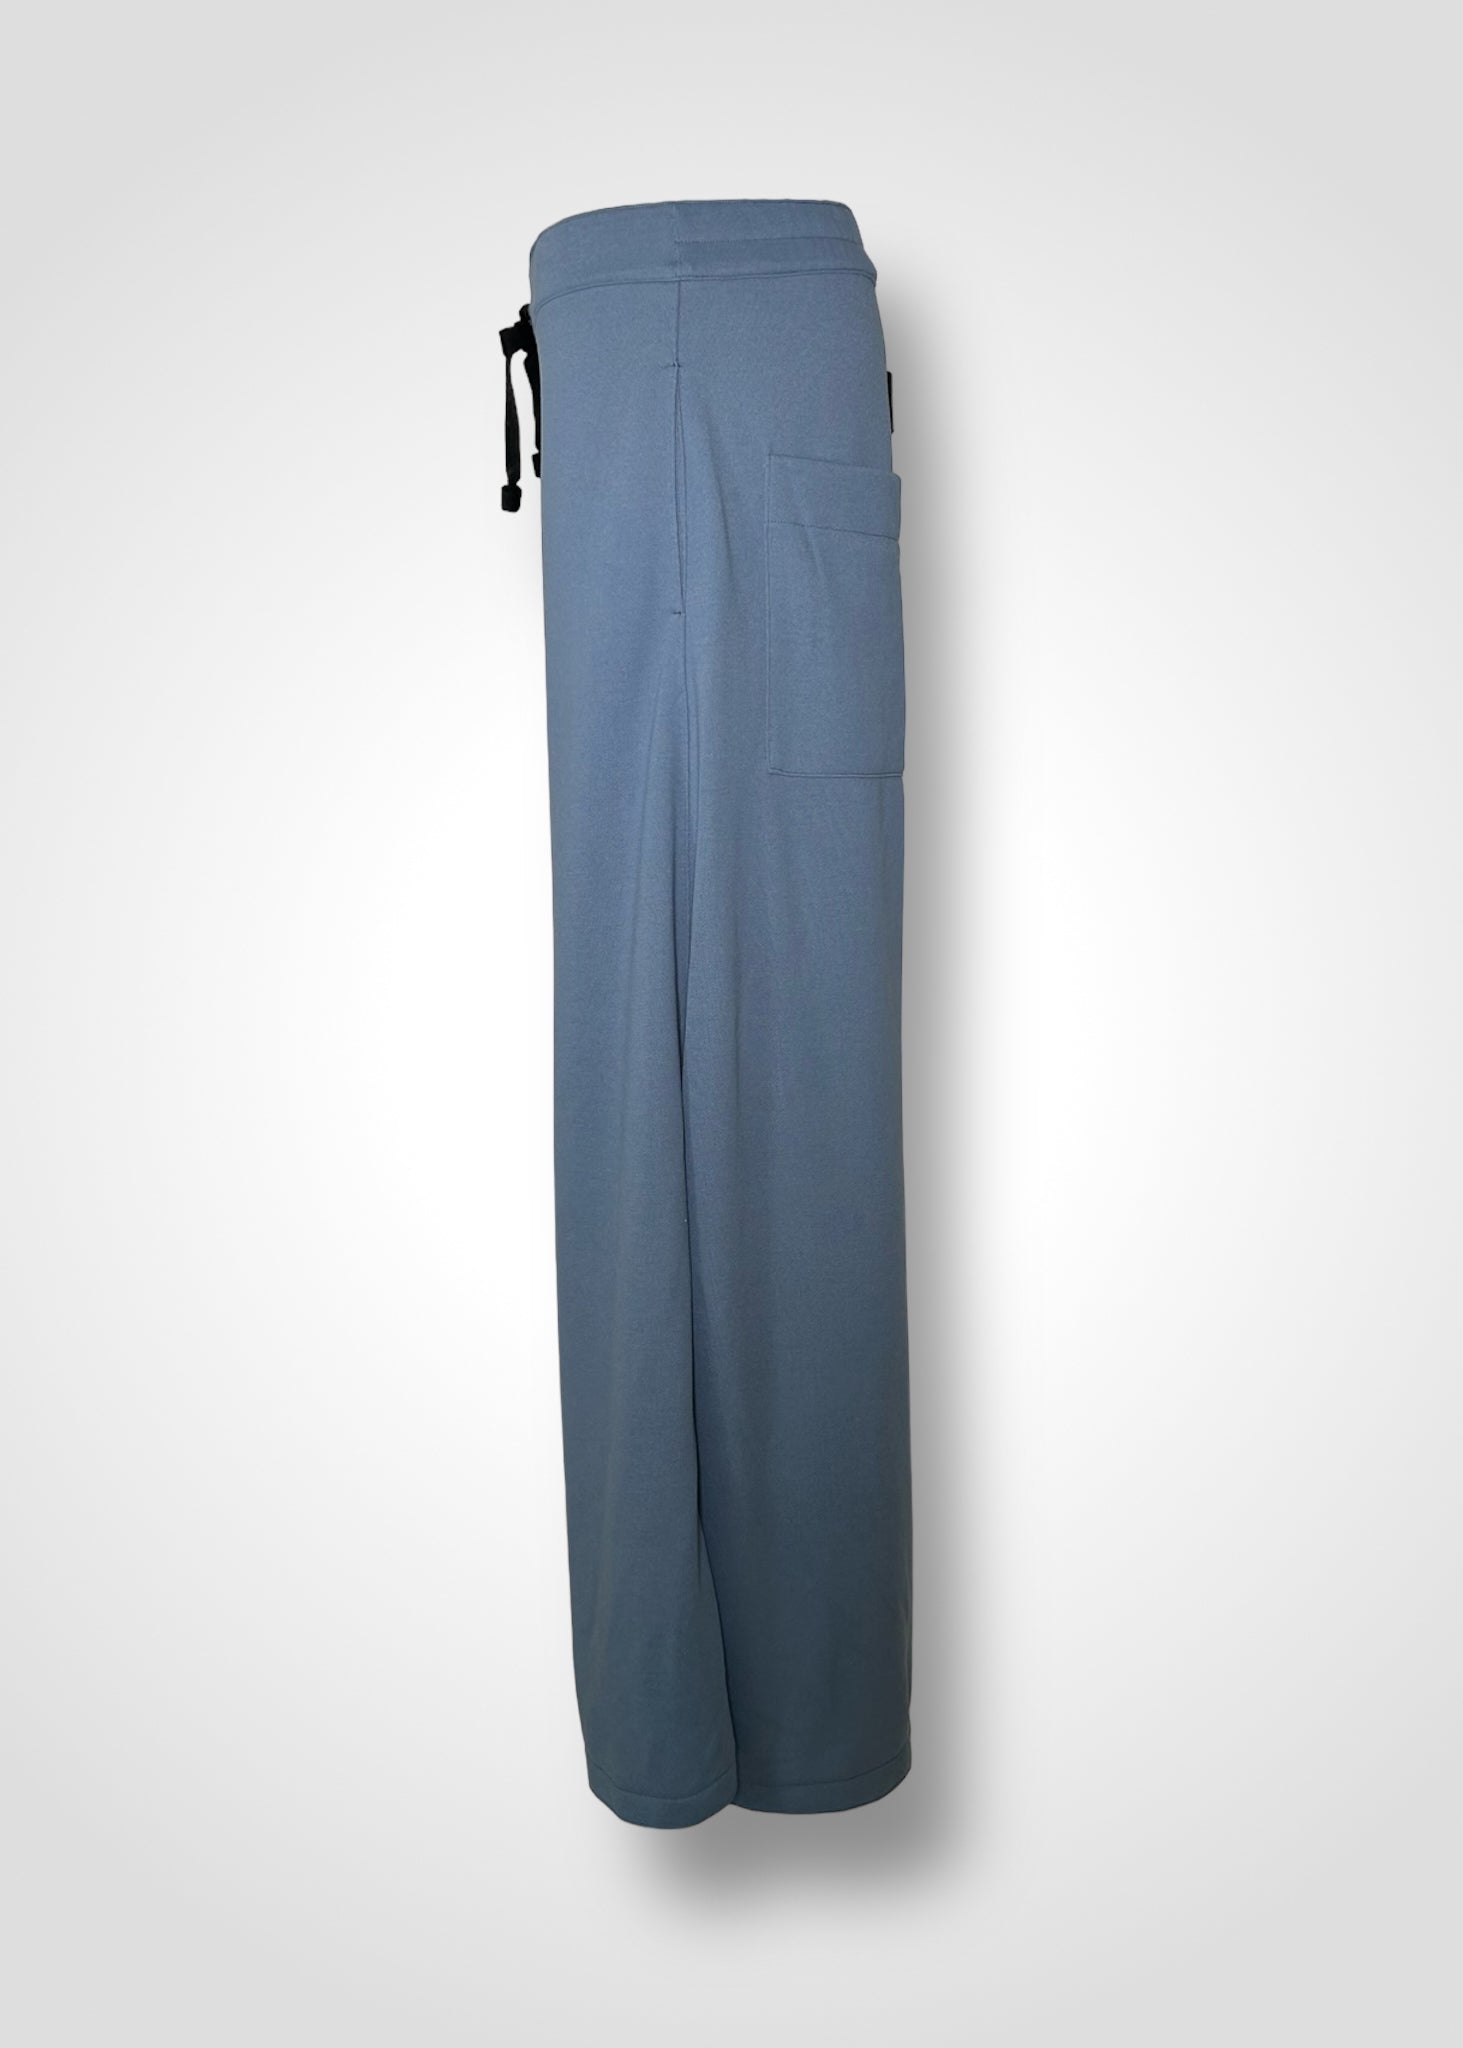 51 JULIA LONG CULOTTE / UV RESISTANT RECYCLED TERRY - C10